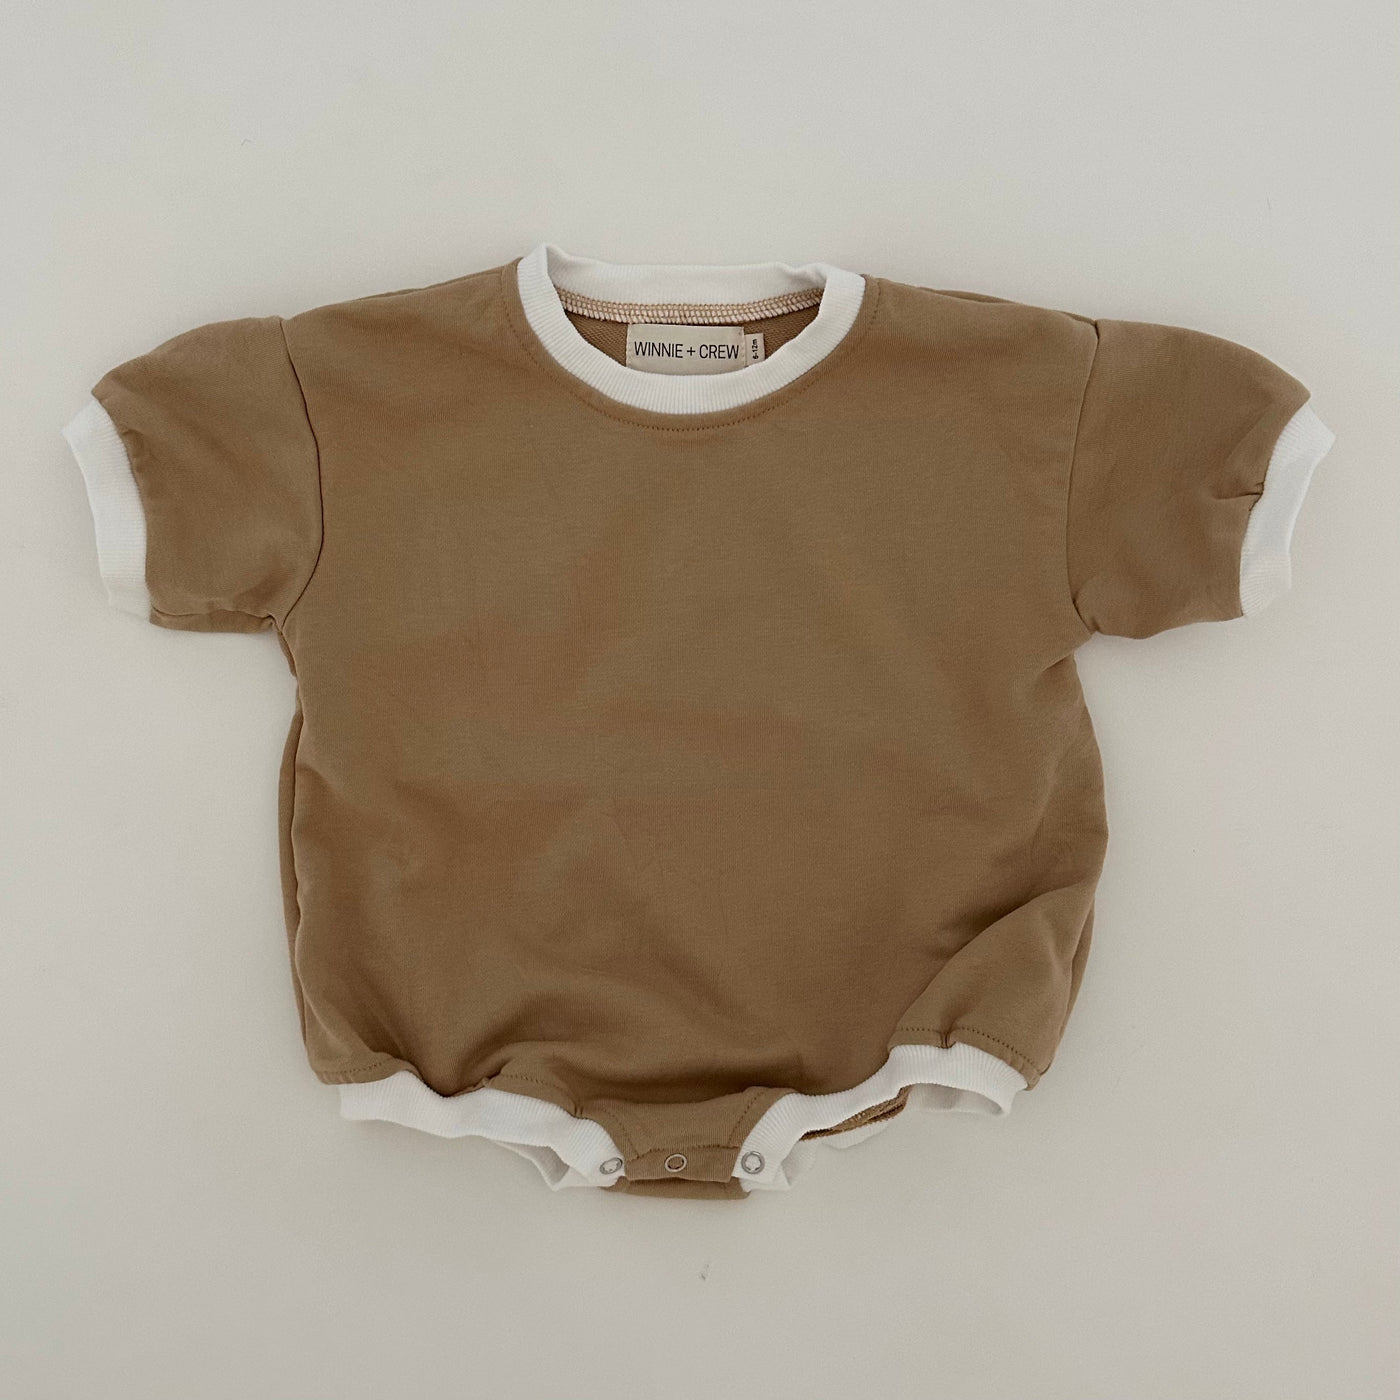 a brown and white baby bodysuit